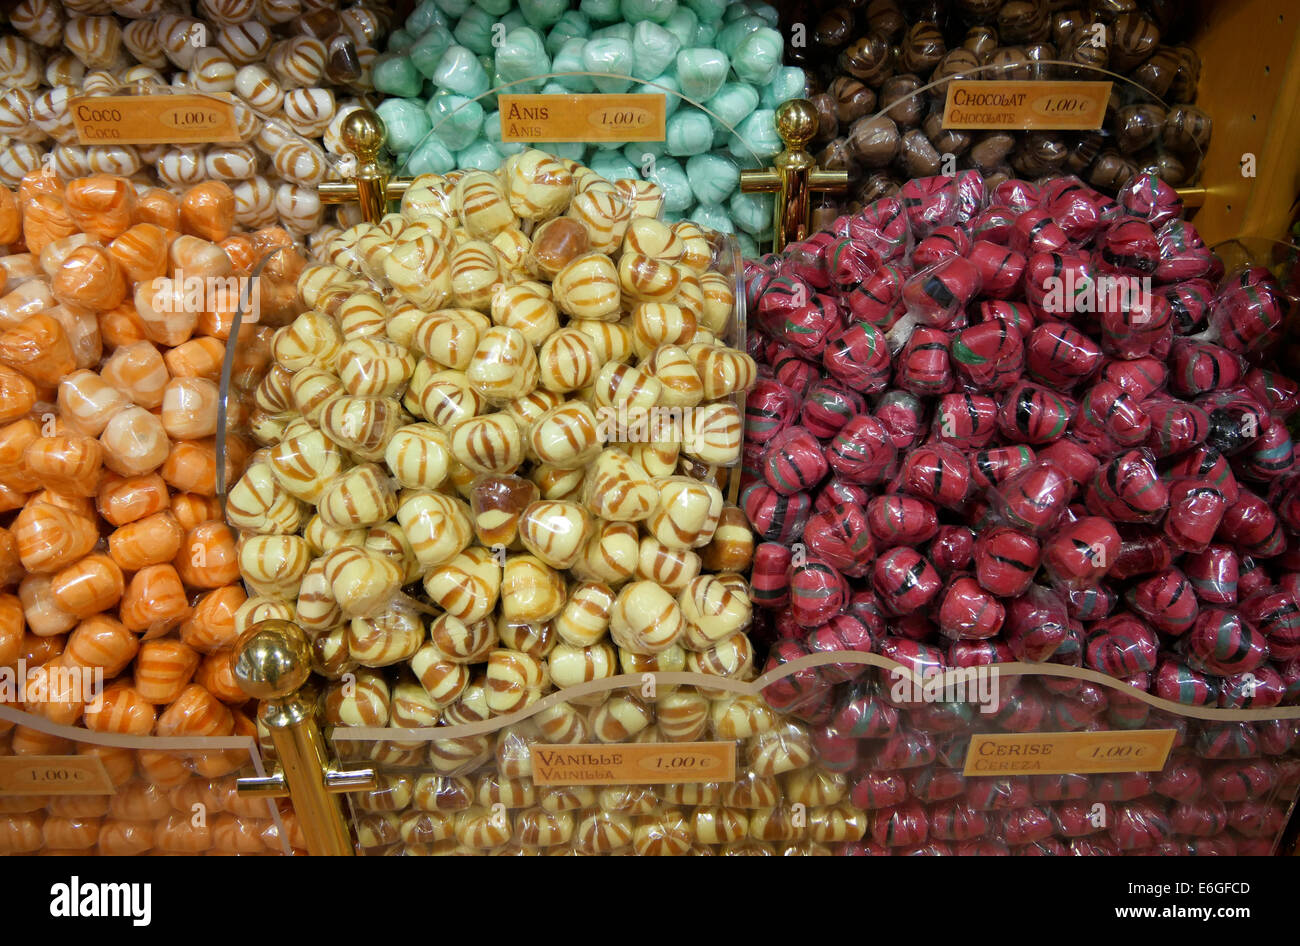 Boiled sweets on sale in confectionery shop in Carcassonne, France Stock Photo